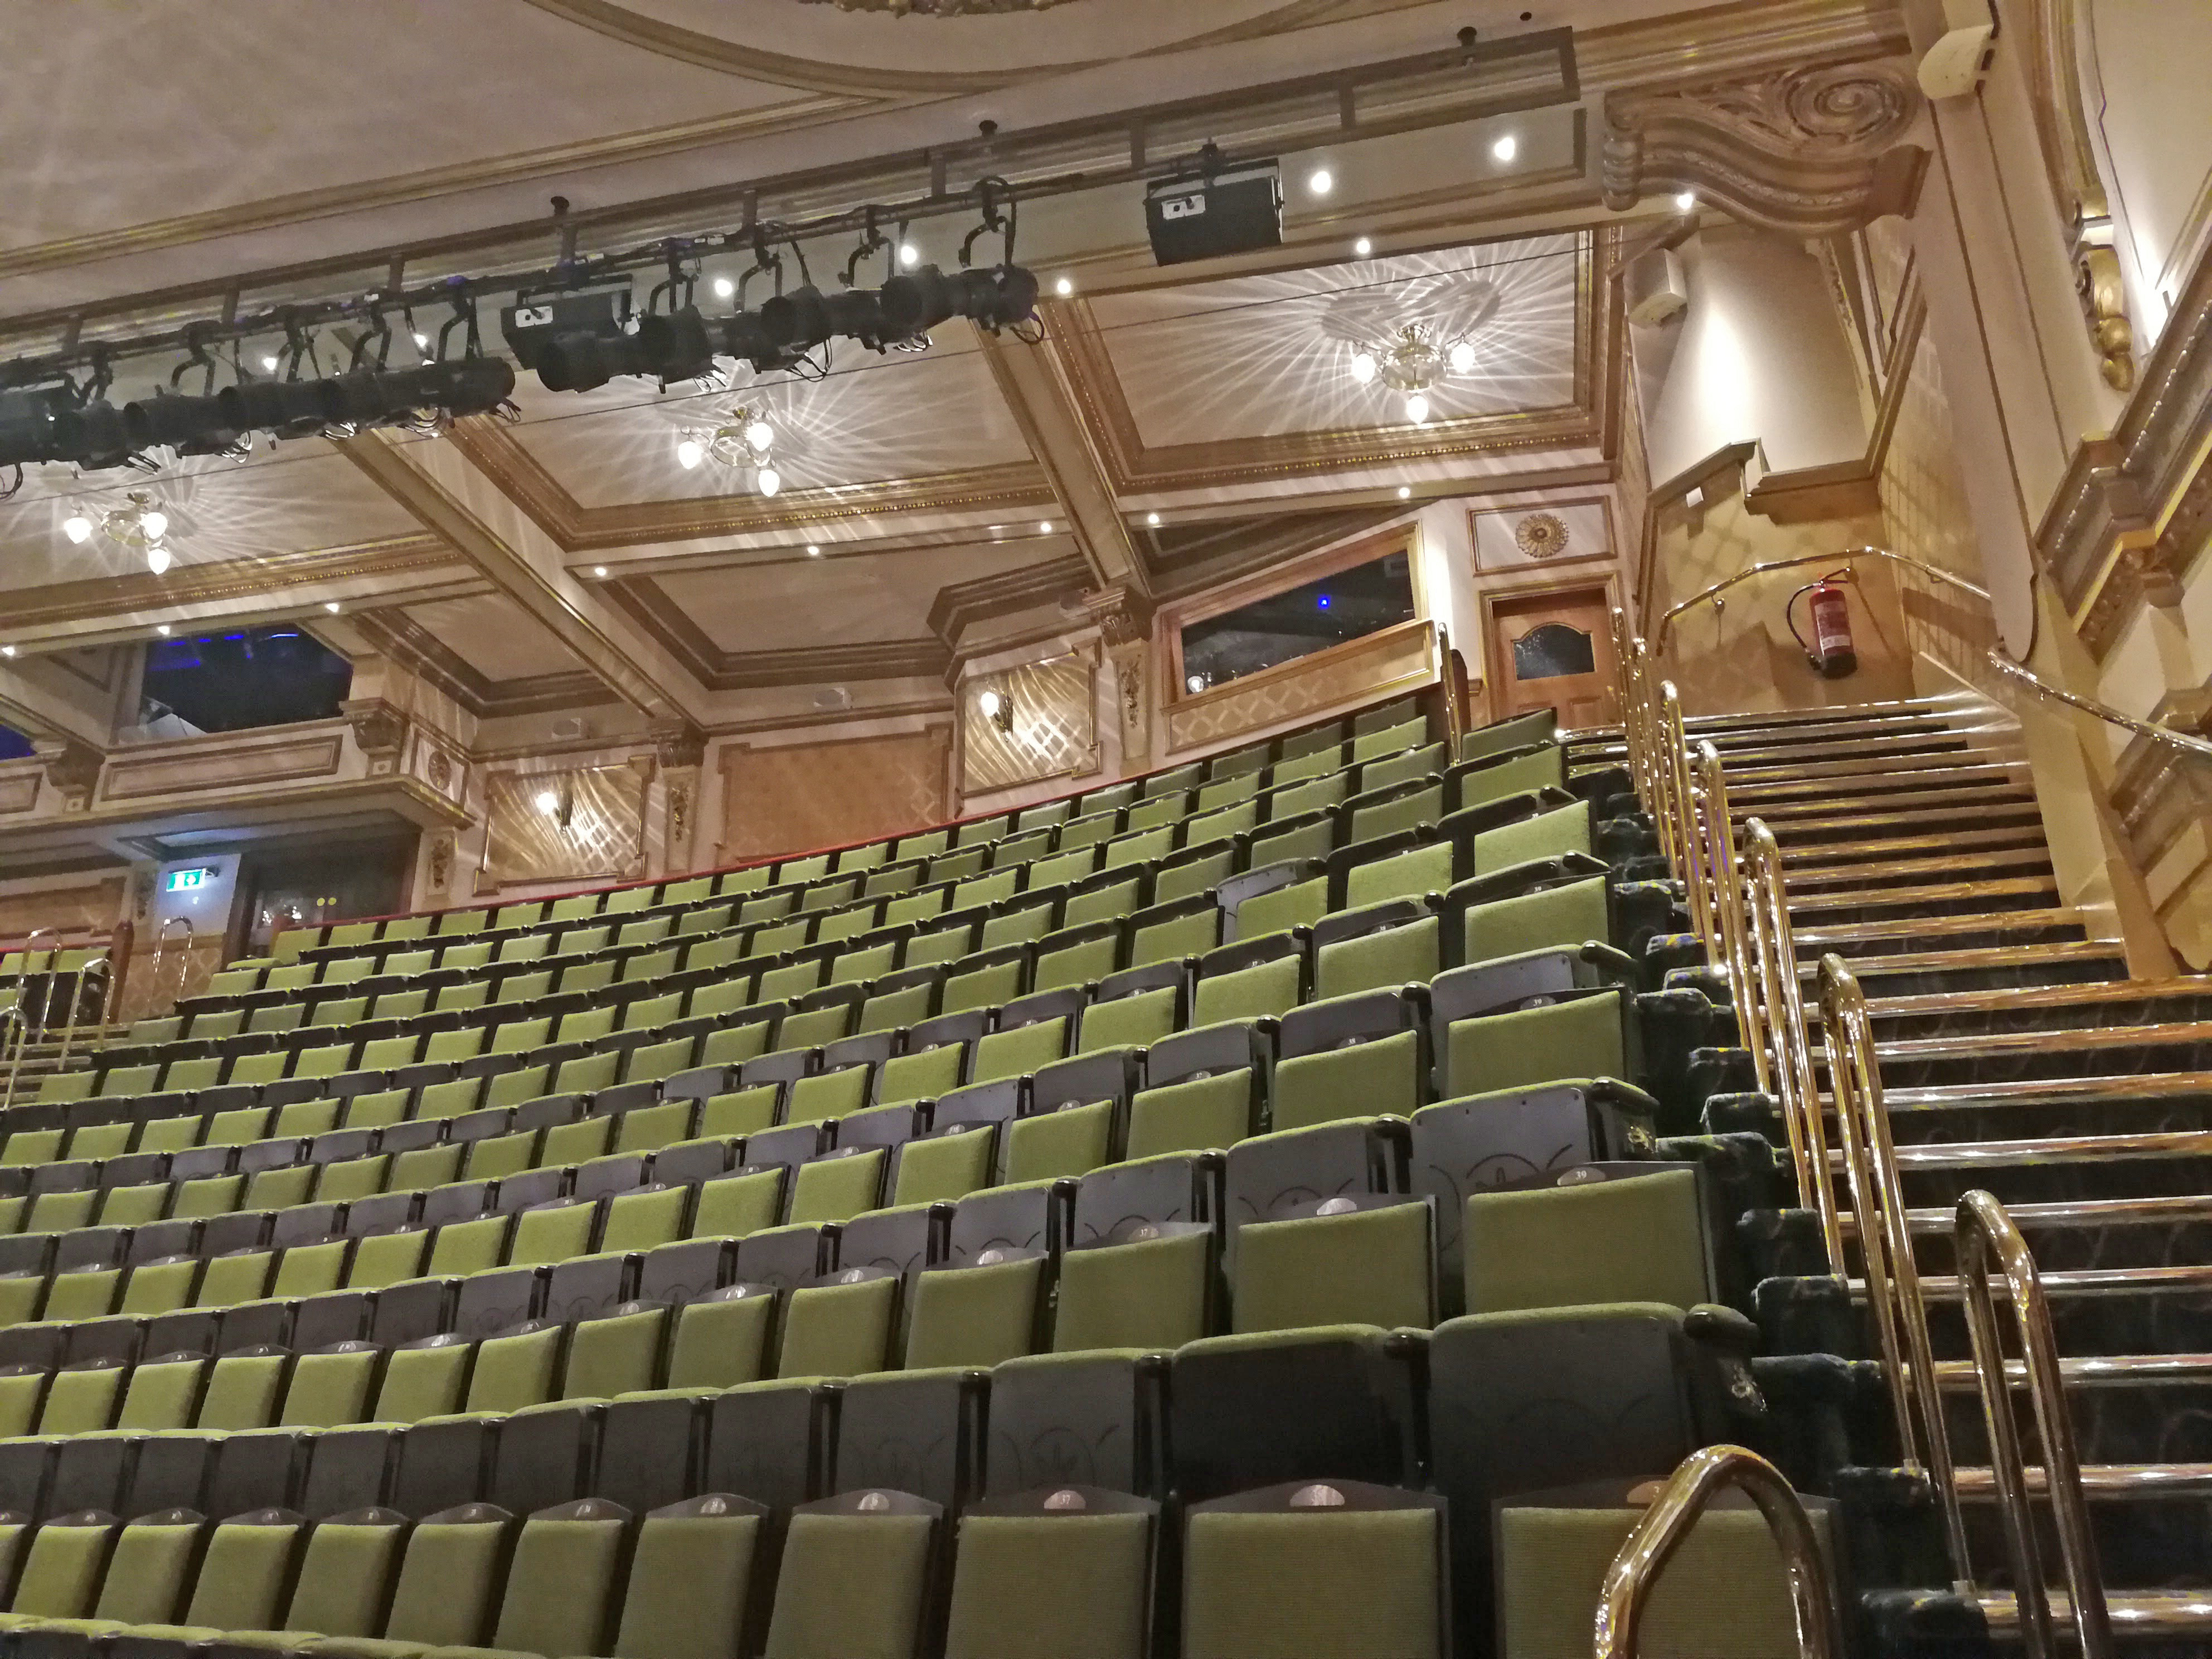 Victoria Palace Theatre – Ed Harty